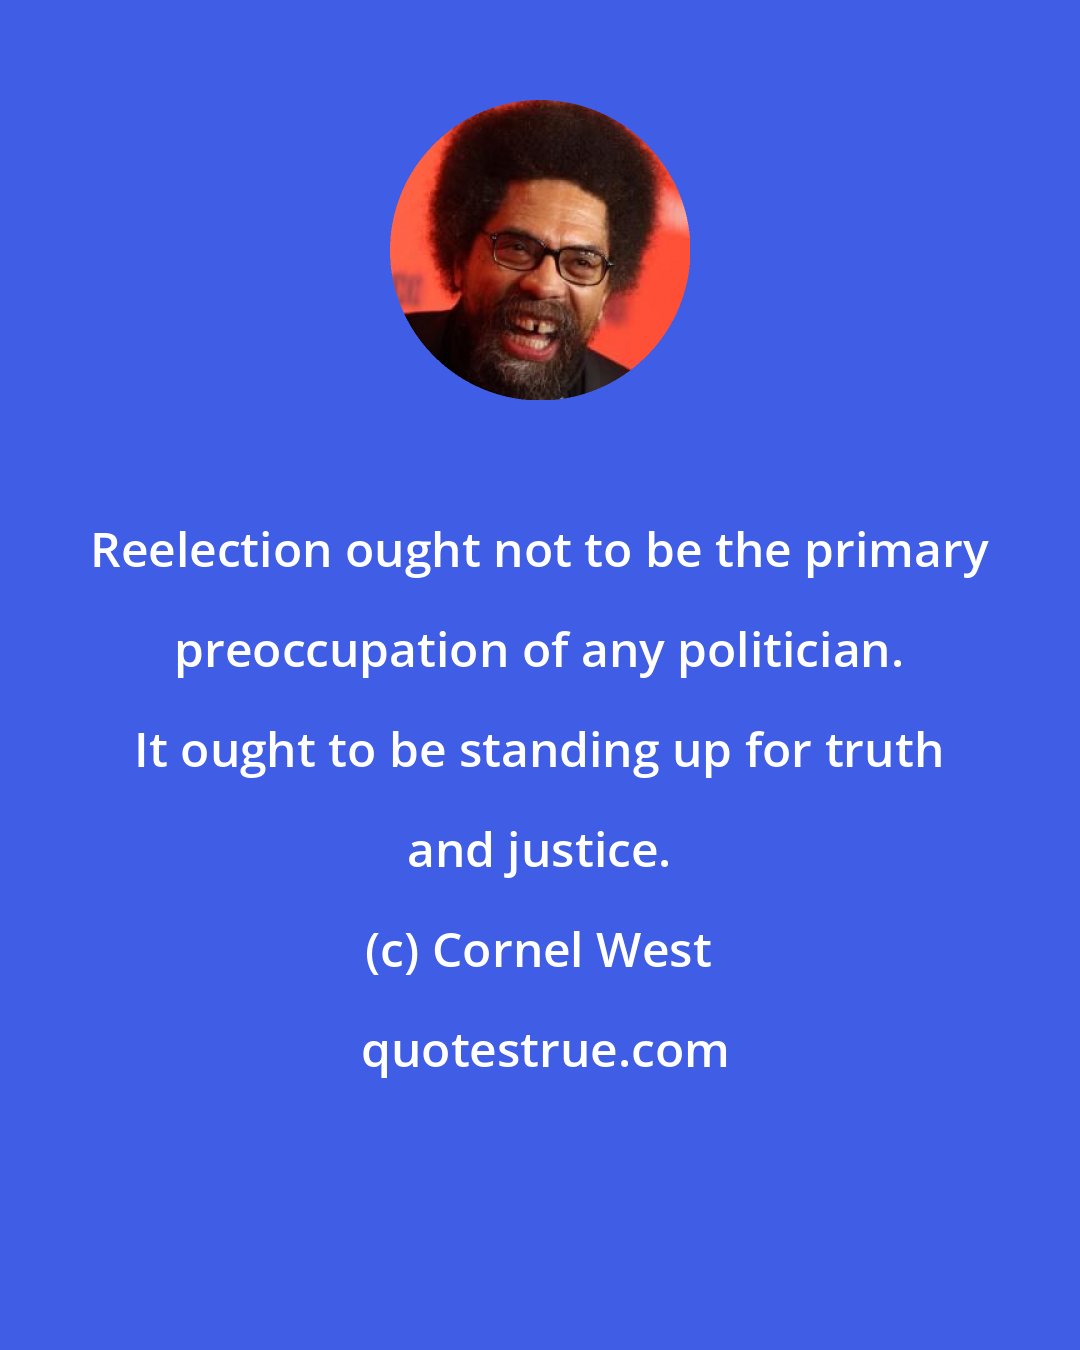 Cornel West: Reelection ought not to be the primary preoccupation of any politician. It ought to be standing up for truth and justice.